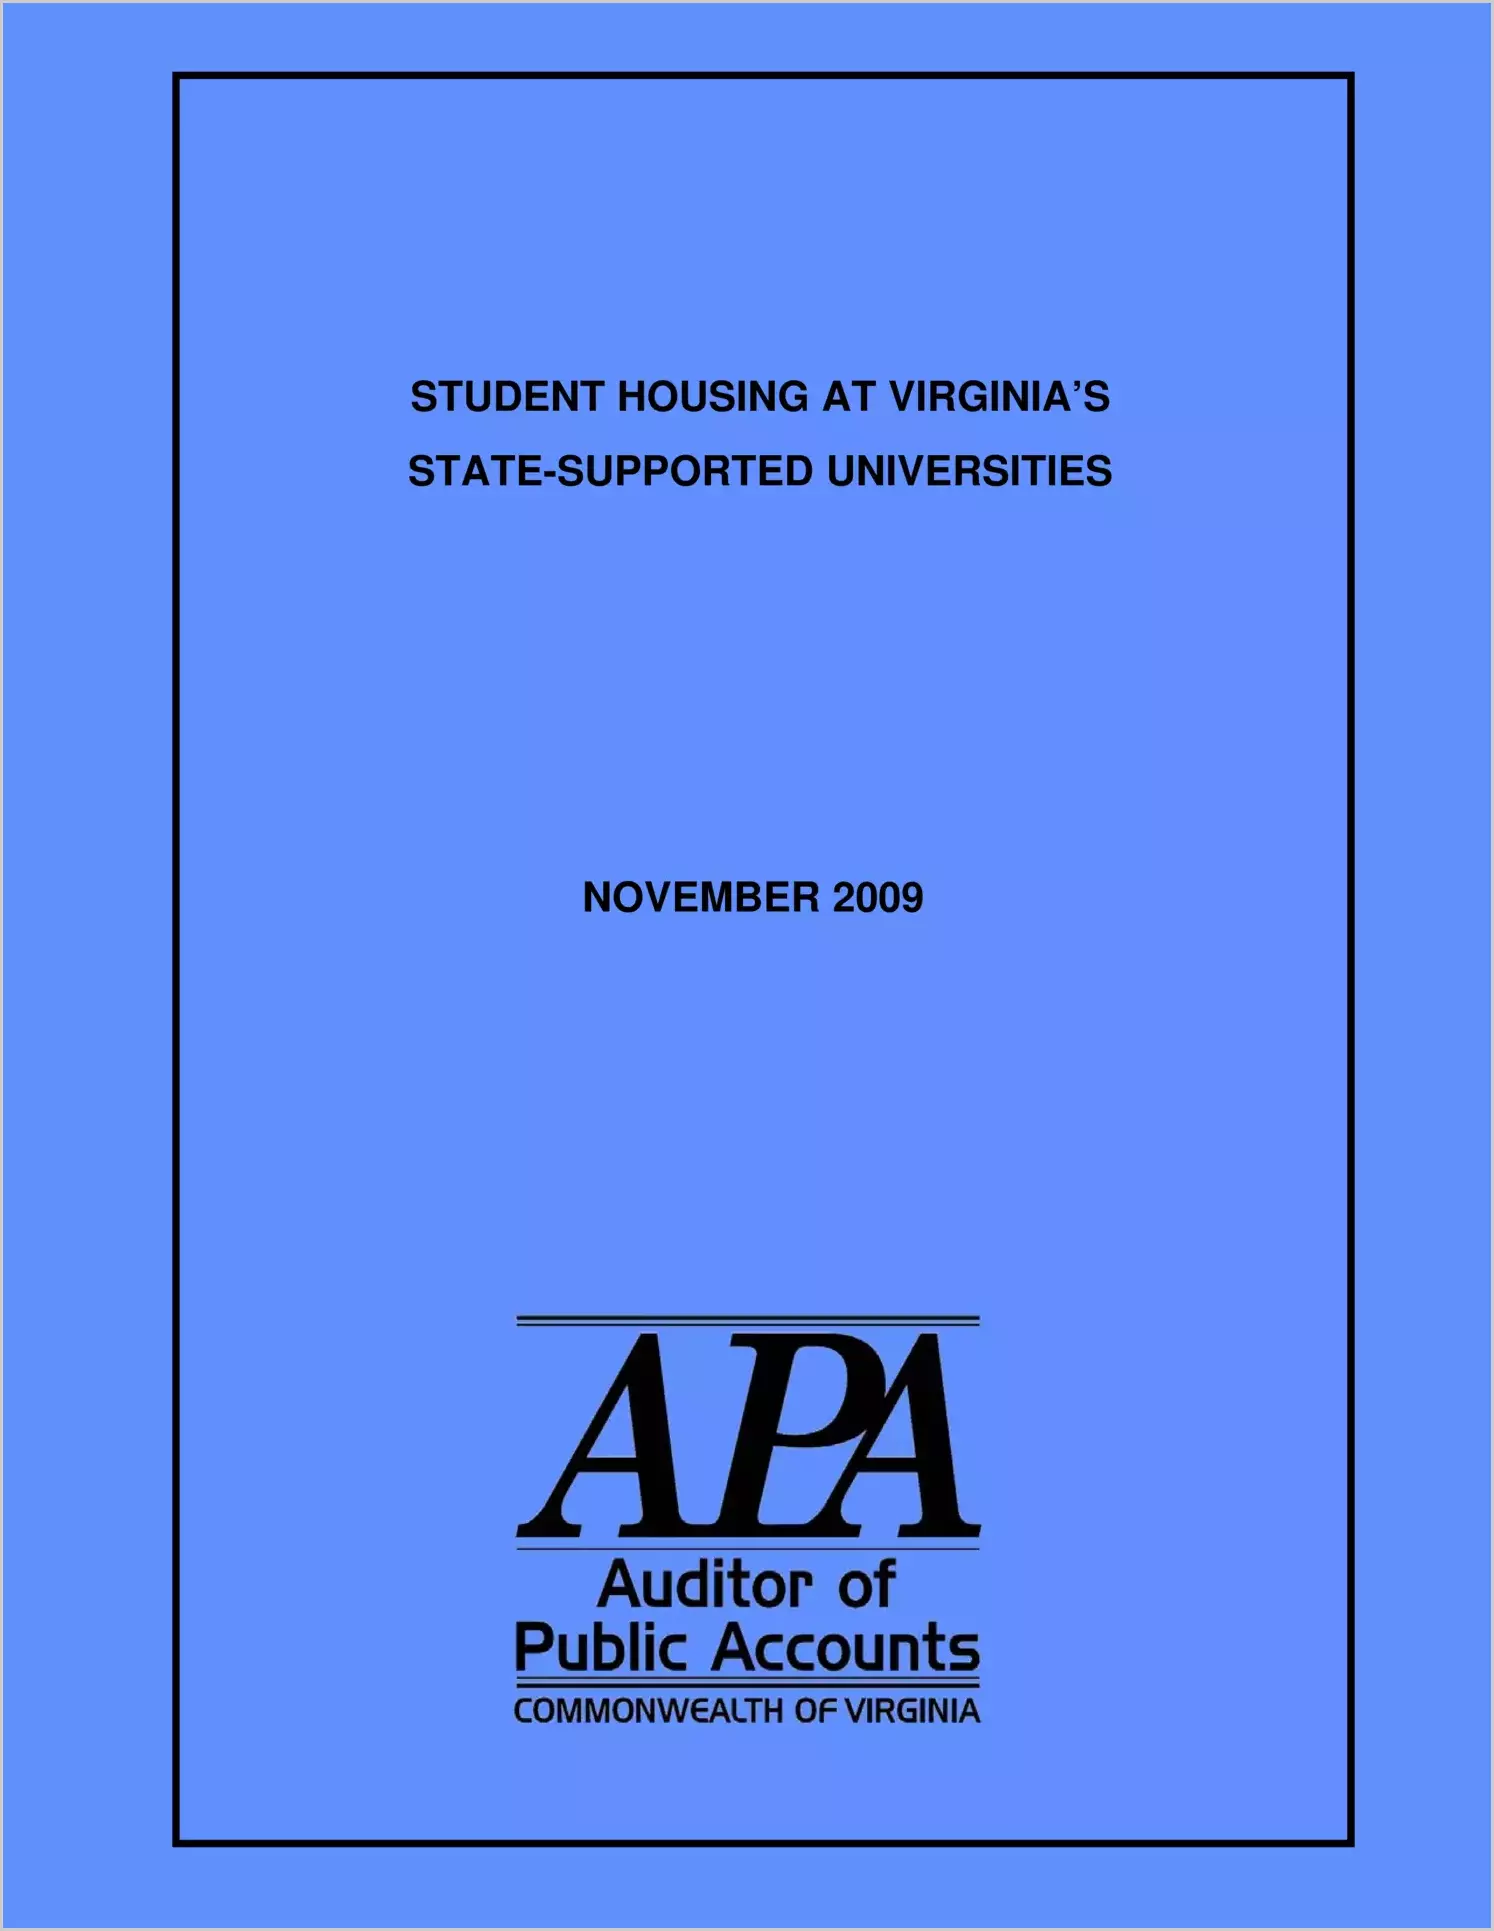 Student Housing at Virginia's State-Supported Universities as of November 2009